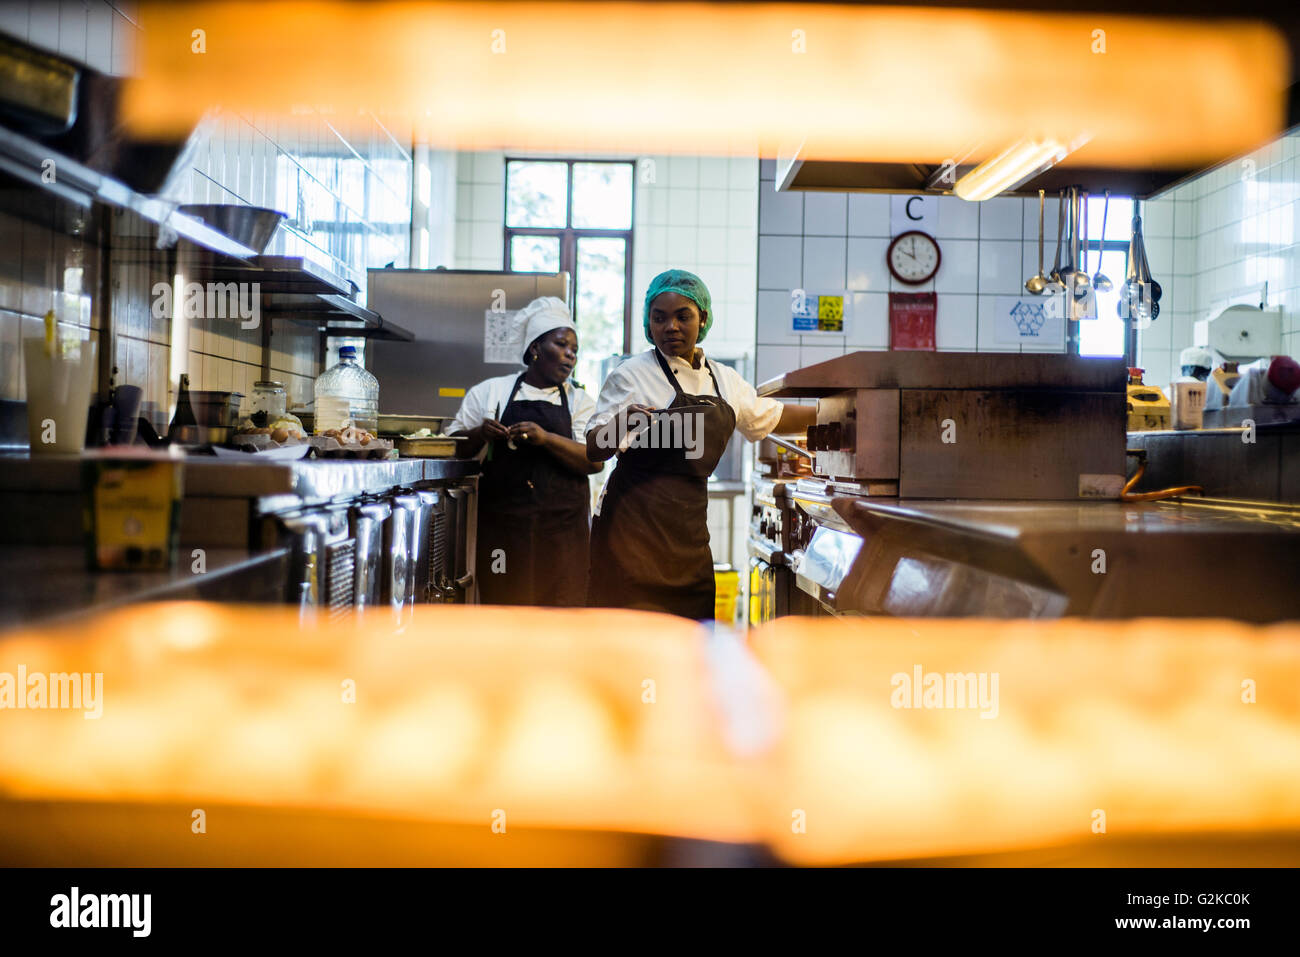 Chefs prepare dishes for lunch at NICE restaurant, Windhoek, Namibia. They start work at 7 o’clock in the morning to be ready for opening at 12 p.m. Chefs make soups, prepare vegetables and snacks, cut basic ingredients for salads. Stock Photo